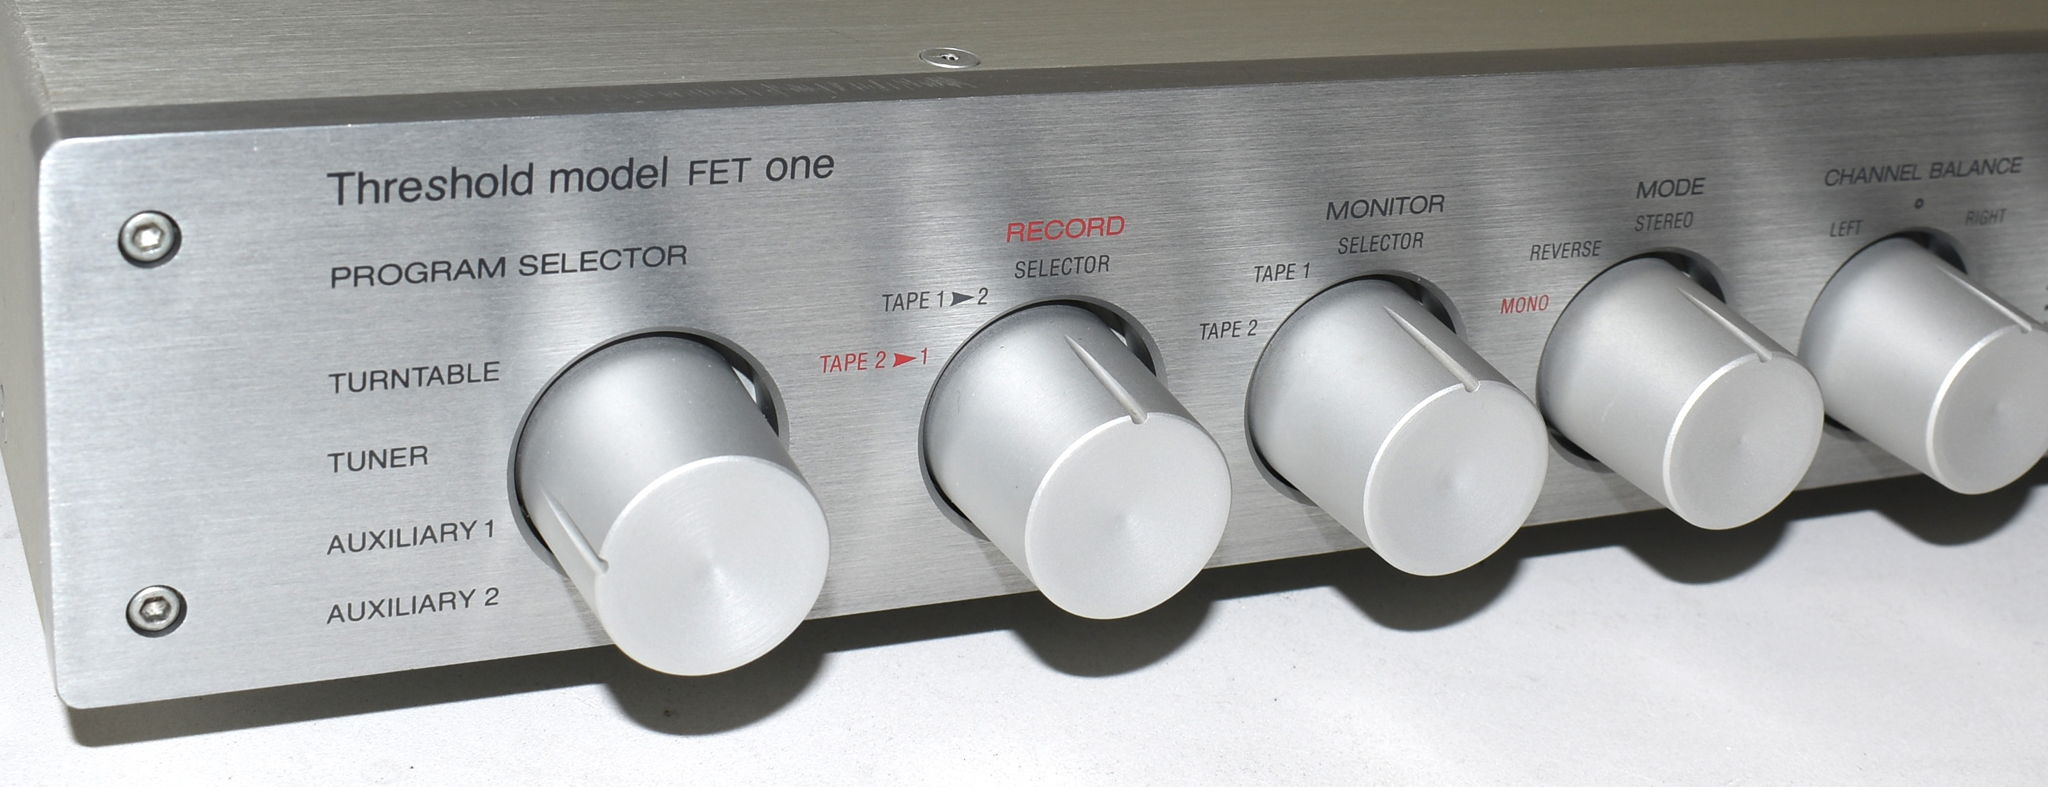 Threshold FET ONE Linear State Pre-Amplifier PREAMP w/ ... 4